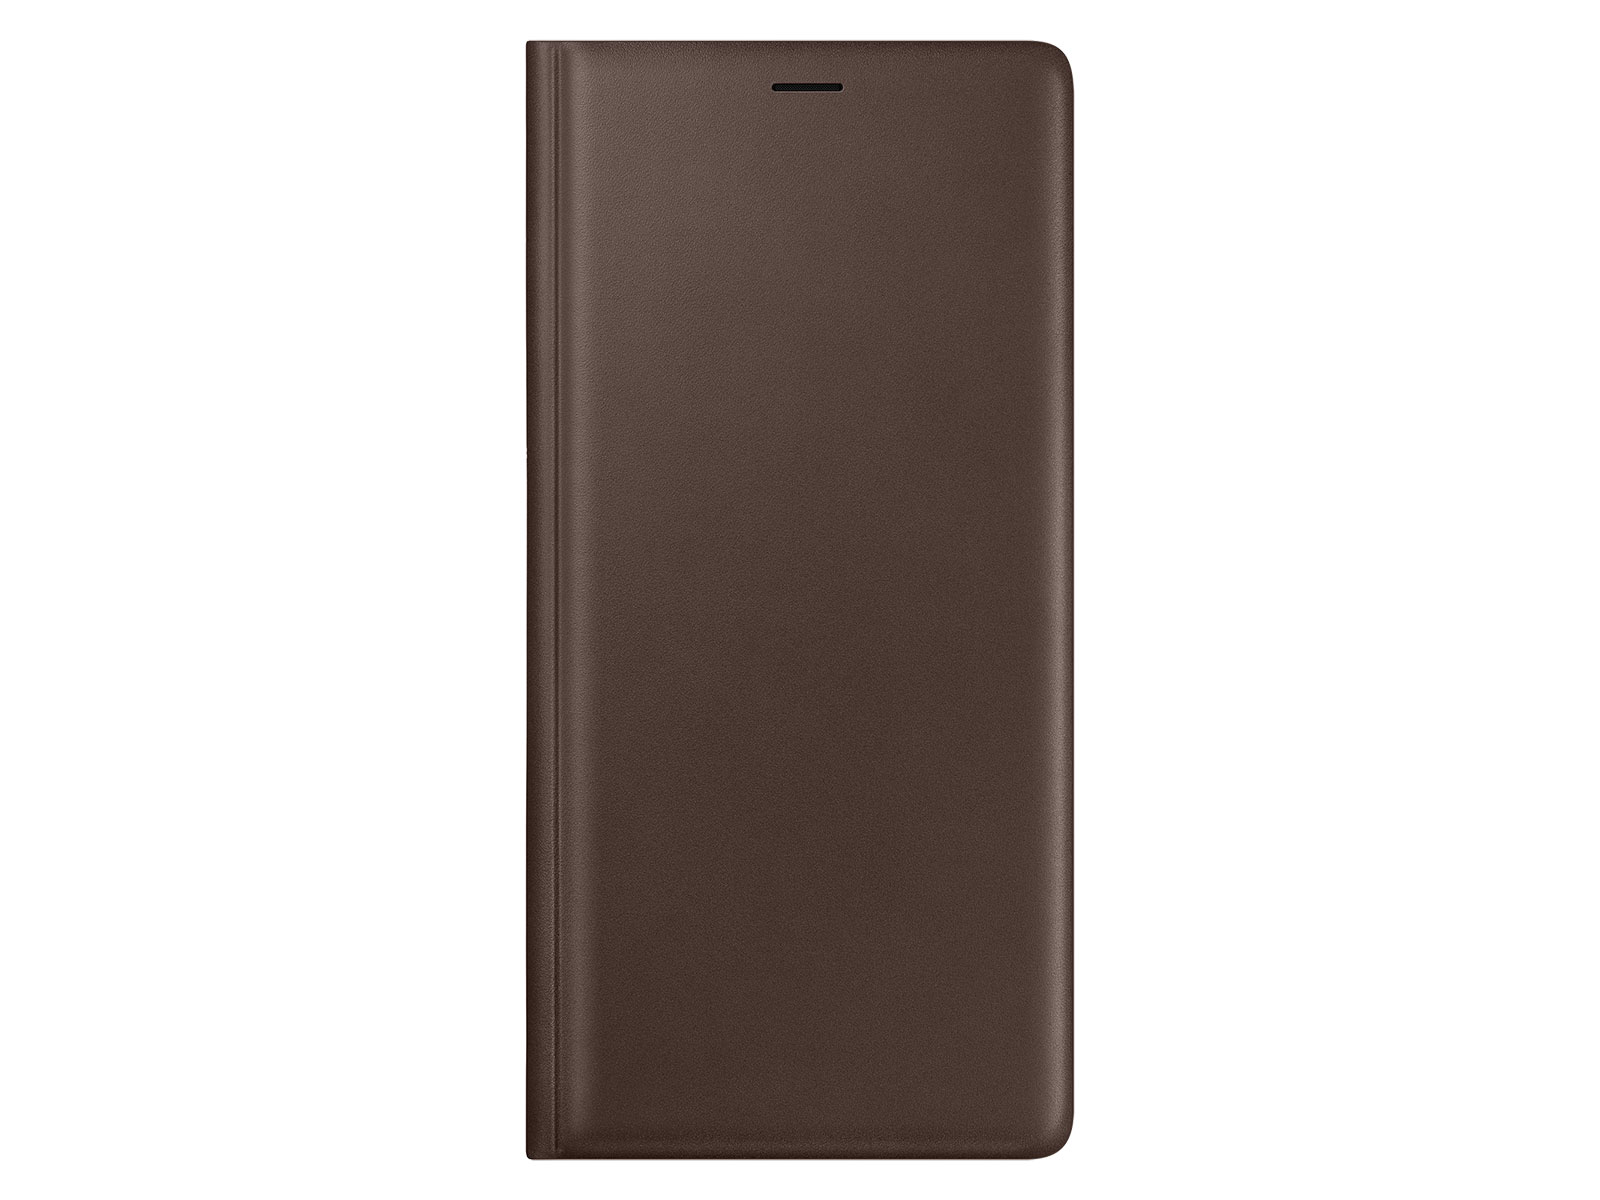 Simple-Style Leather Case for Samsung Galaxy Note9 Flip Cover fit for Samsung Galaxy Note9 Business Gifts 